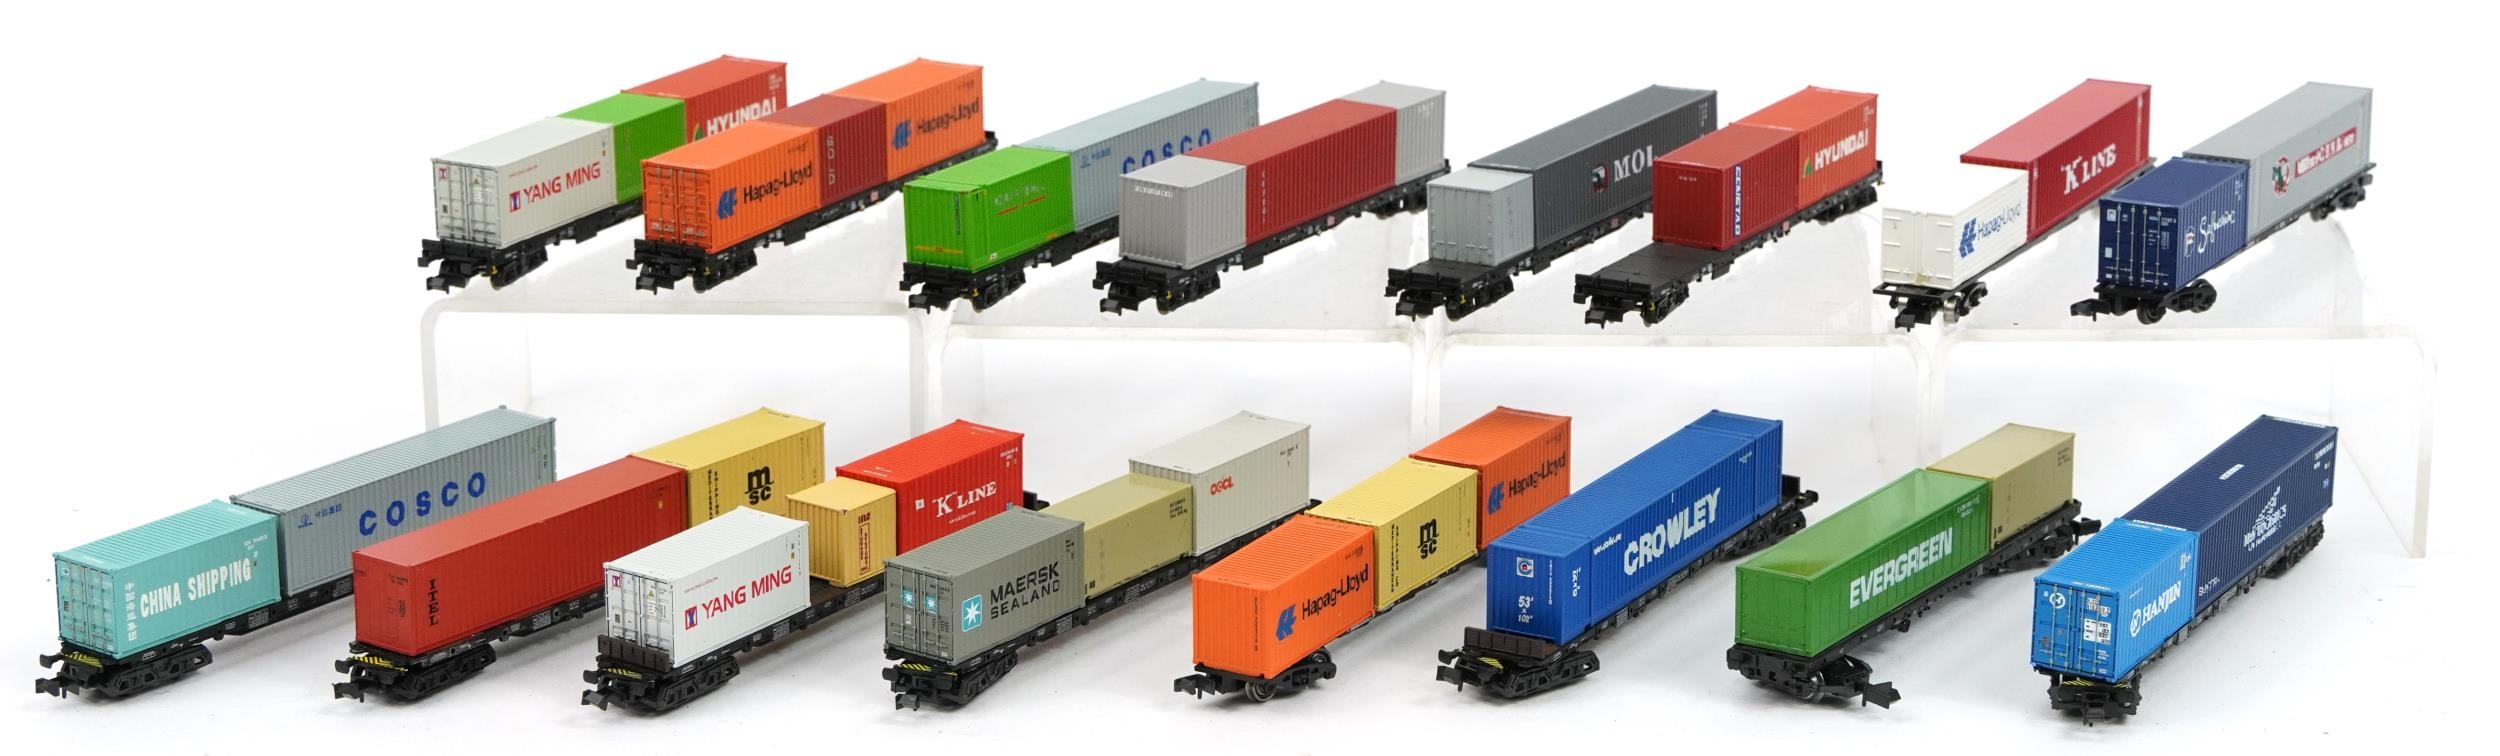 Sixteen N gauge model railway container wagons including Graham Farish, Trix and Minitrix, housed in